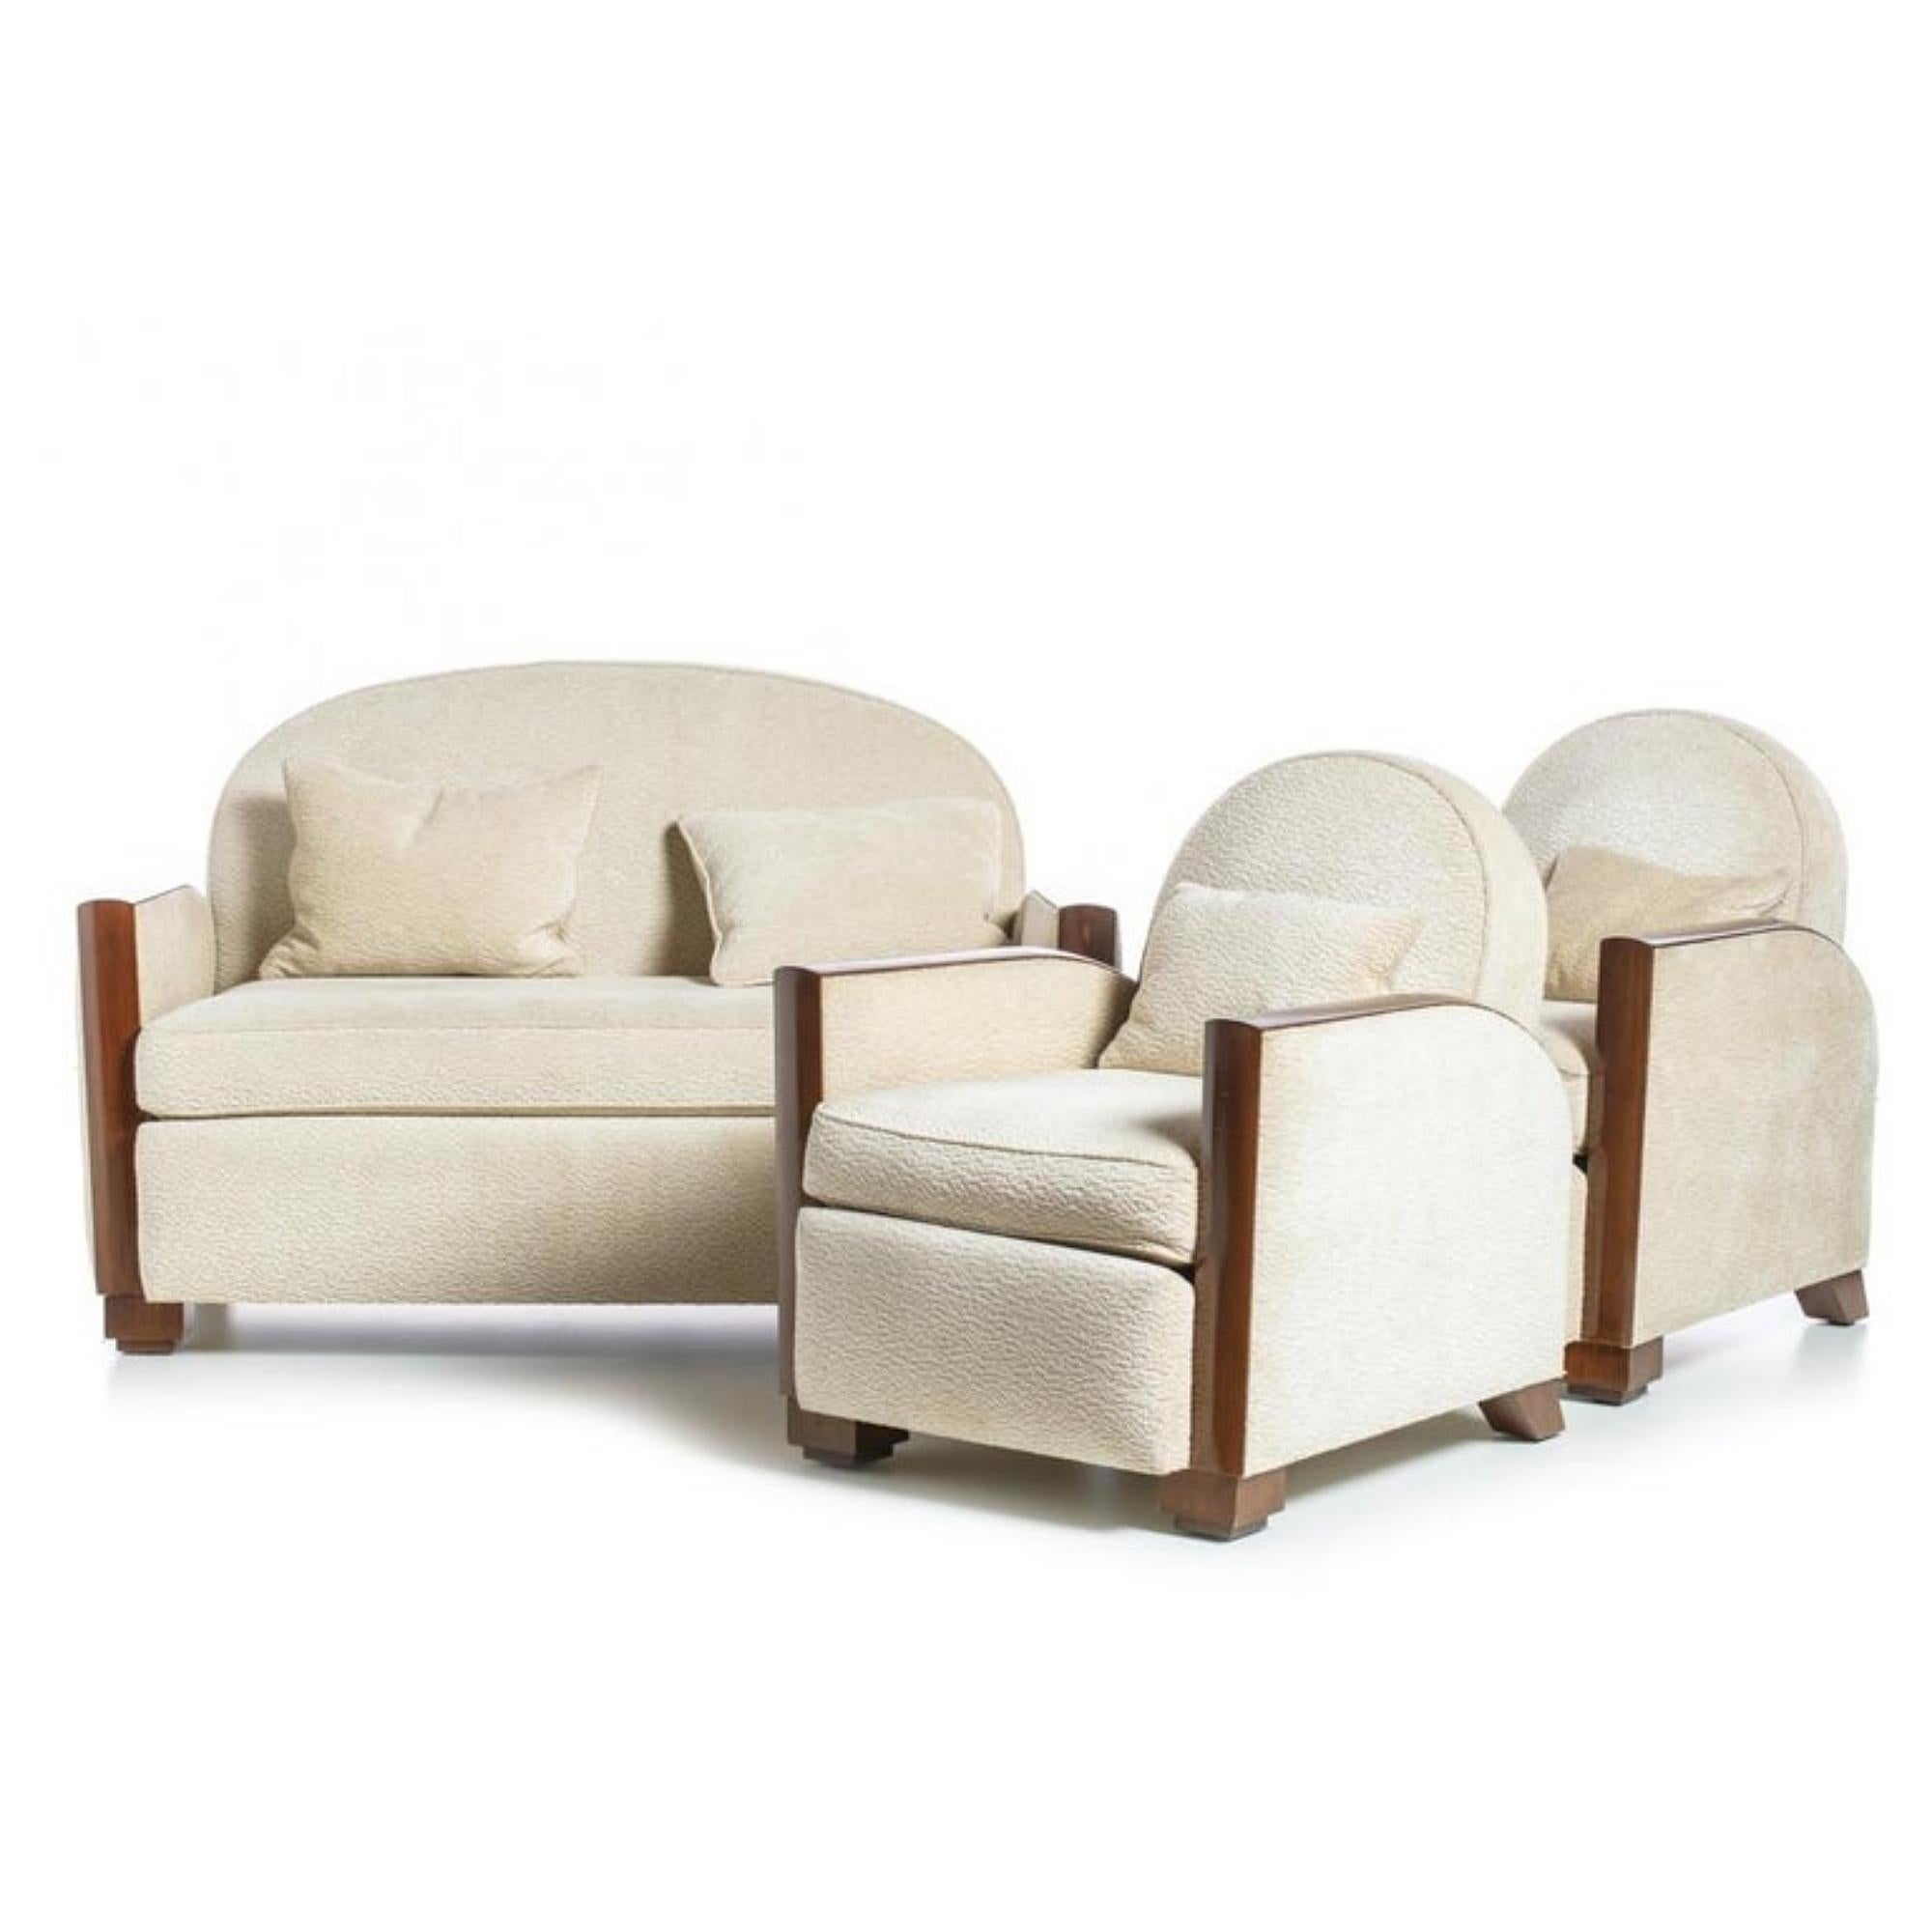 Art Deco sofa set

French, 20th century
 in mahogany wood, 
fabric upholstered back and seats. 
Dim.: (larger) 89 x 139 x 81 cm.
Very good condition.